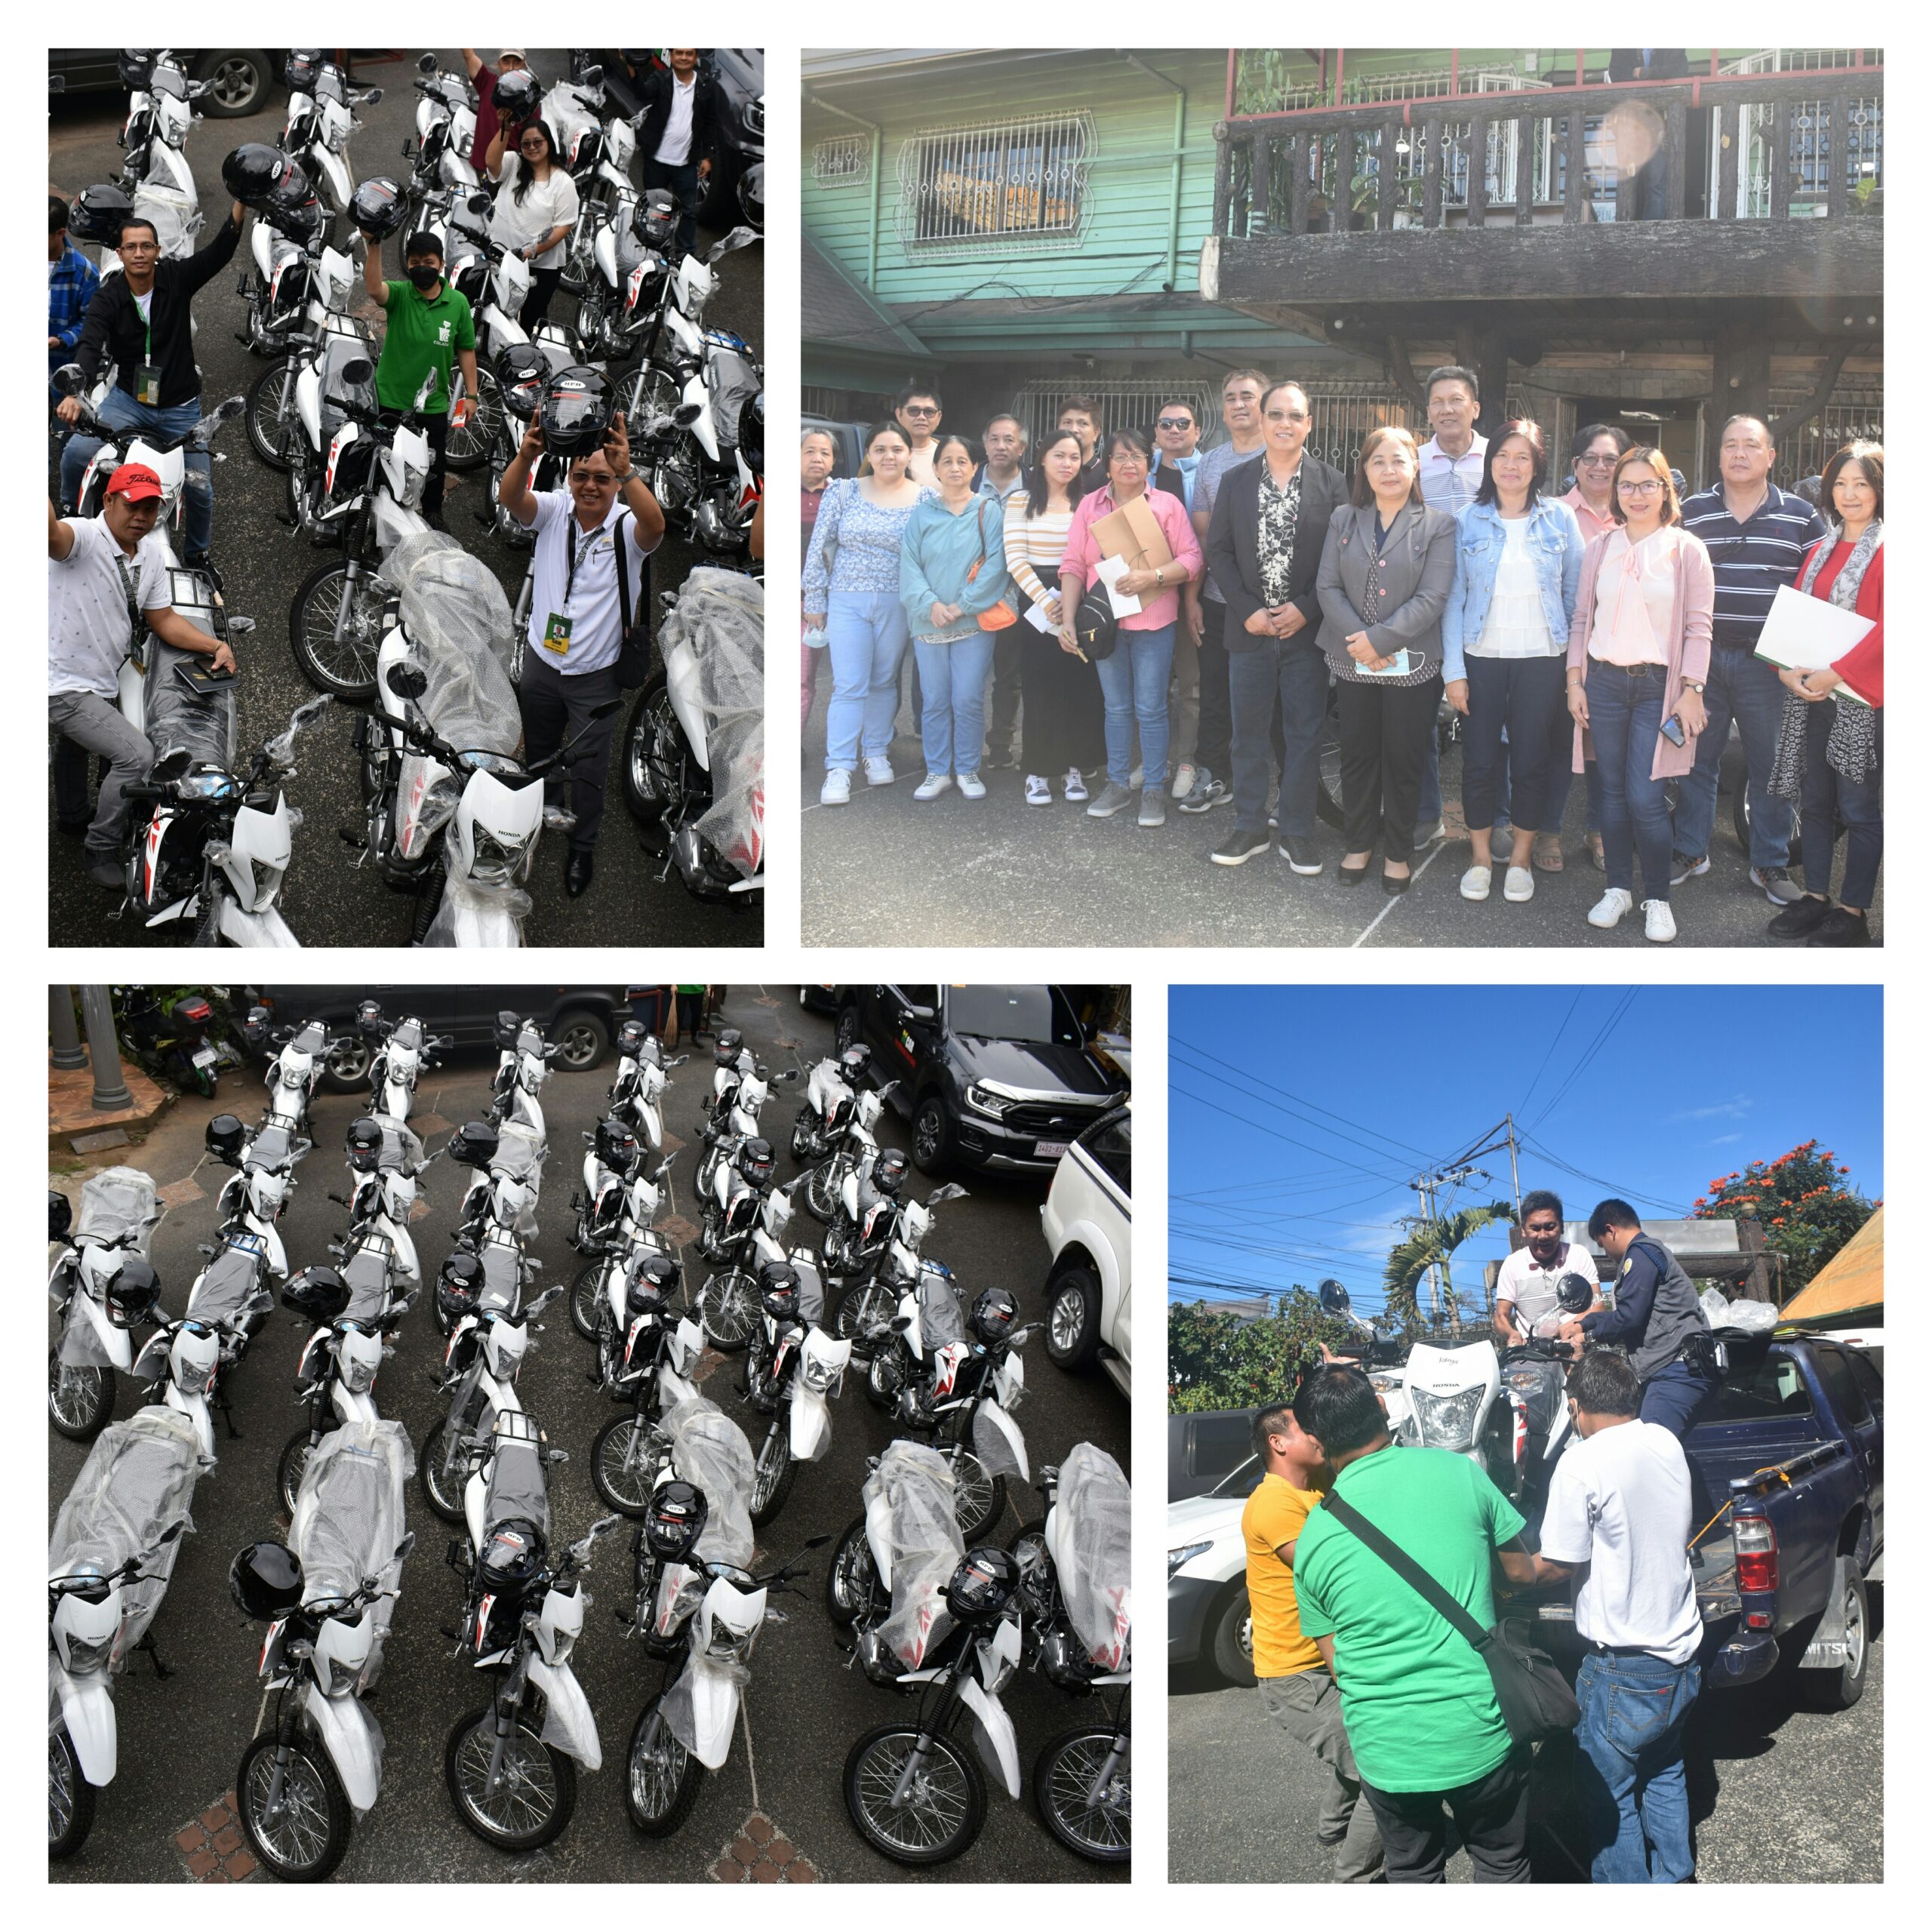 DAR-CAR received 25 motorcycles to hasten parcelization of land holdings